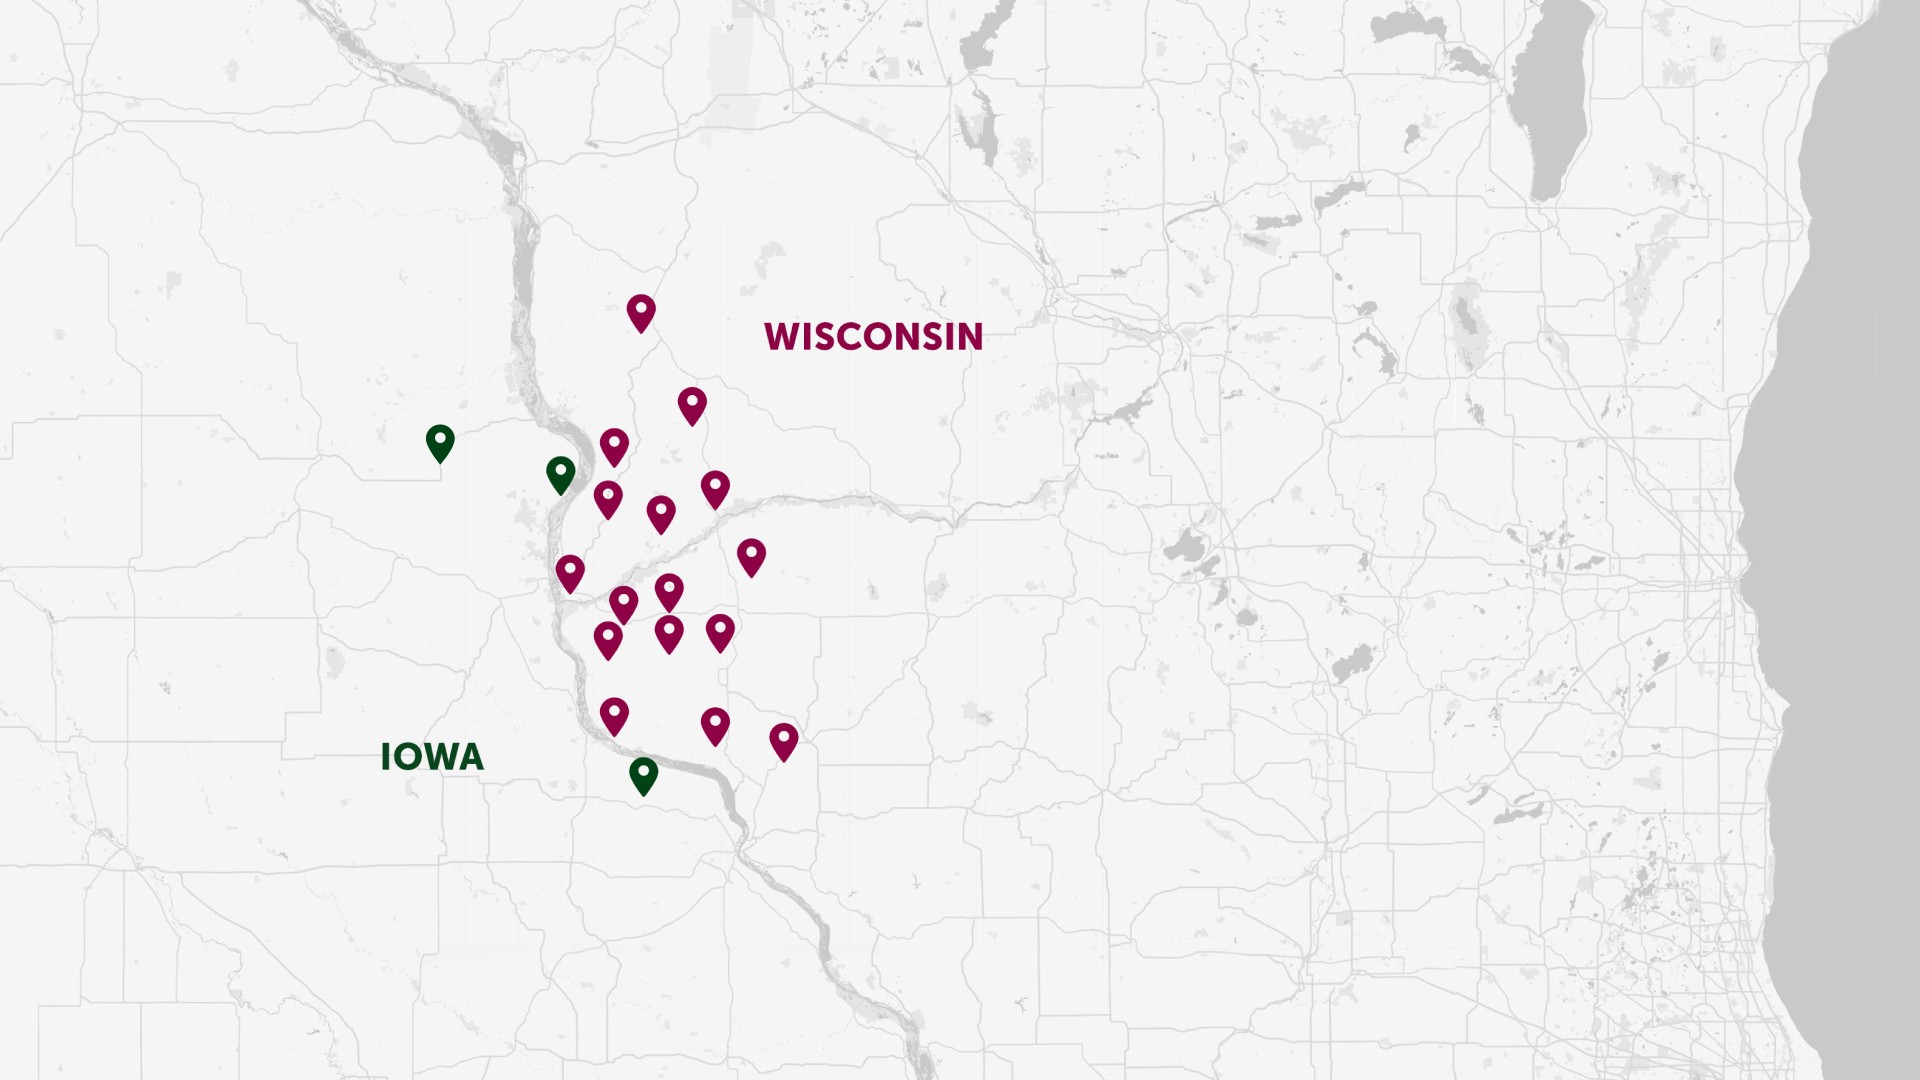 Map with pins showing bank locations in Iowa and Wisconsin